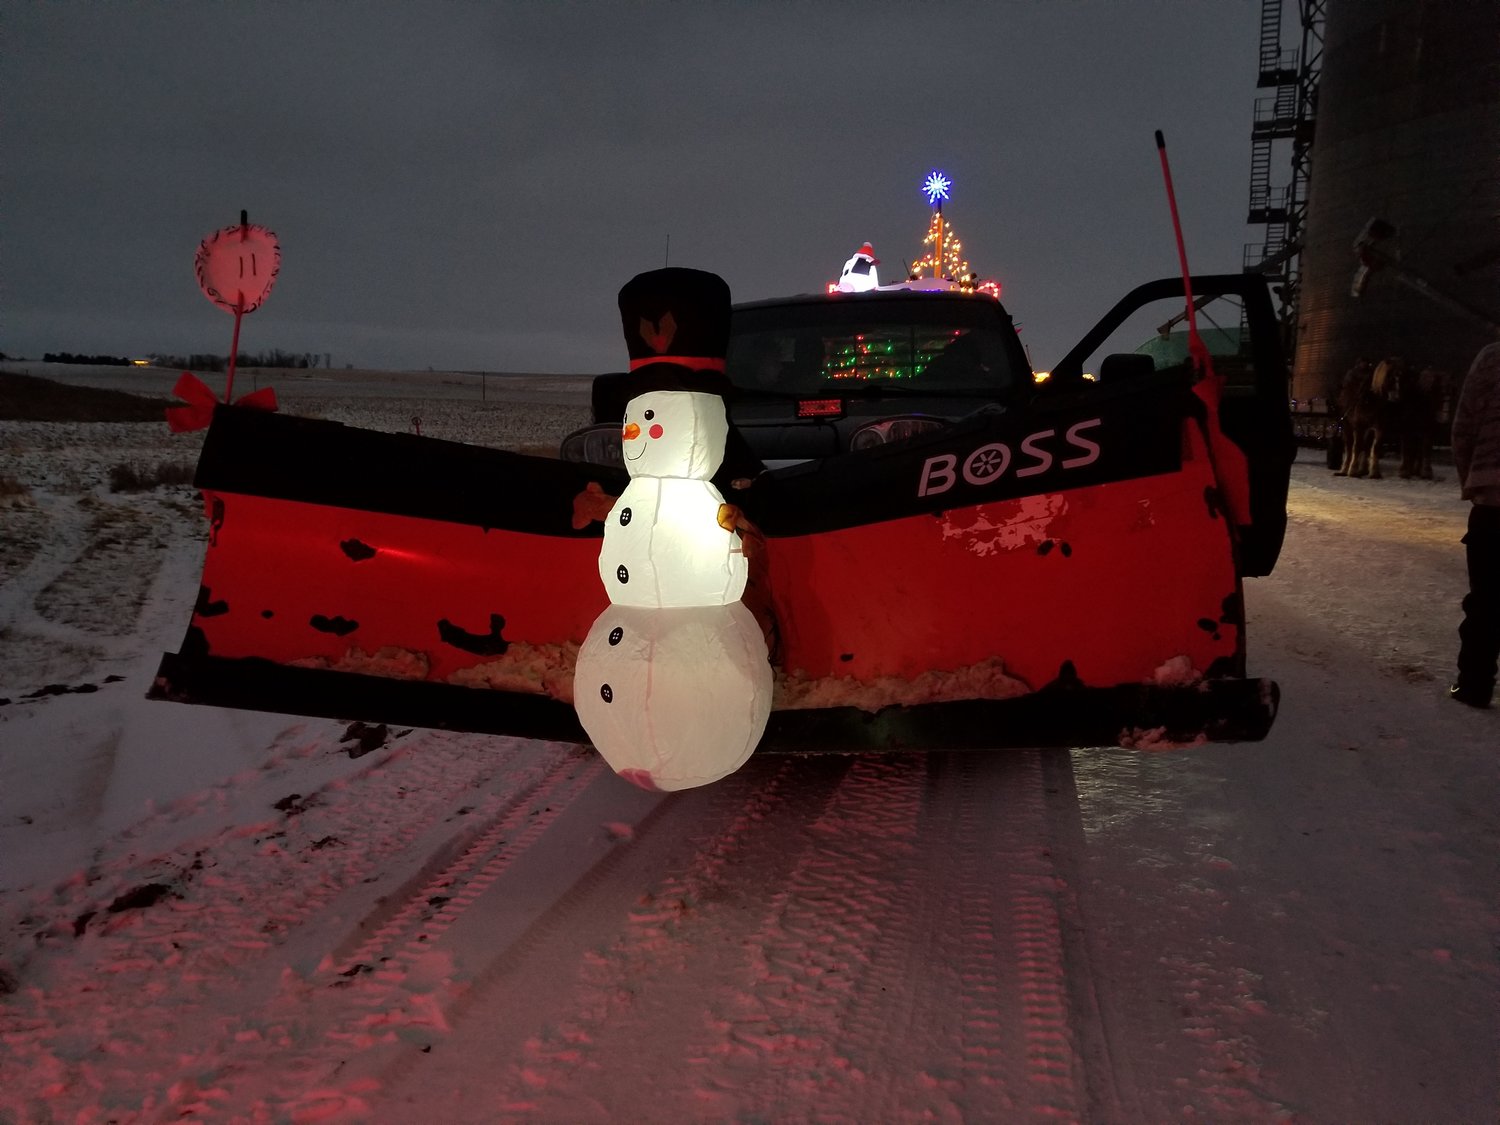 Jason Zemke pushed a troublesome snowman out of the way while cruising Bellechester with his float that carried a lighted tree and a skidloader with a shivering inflatable “driver”.   The entry won third place.